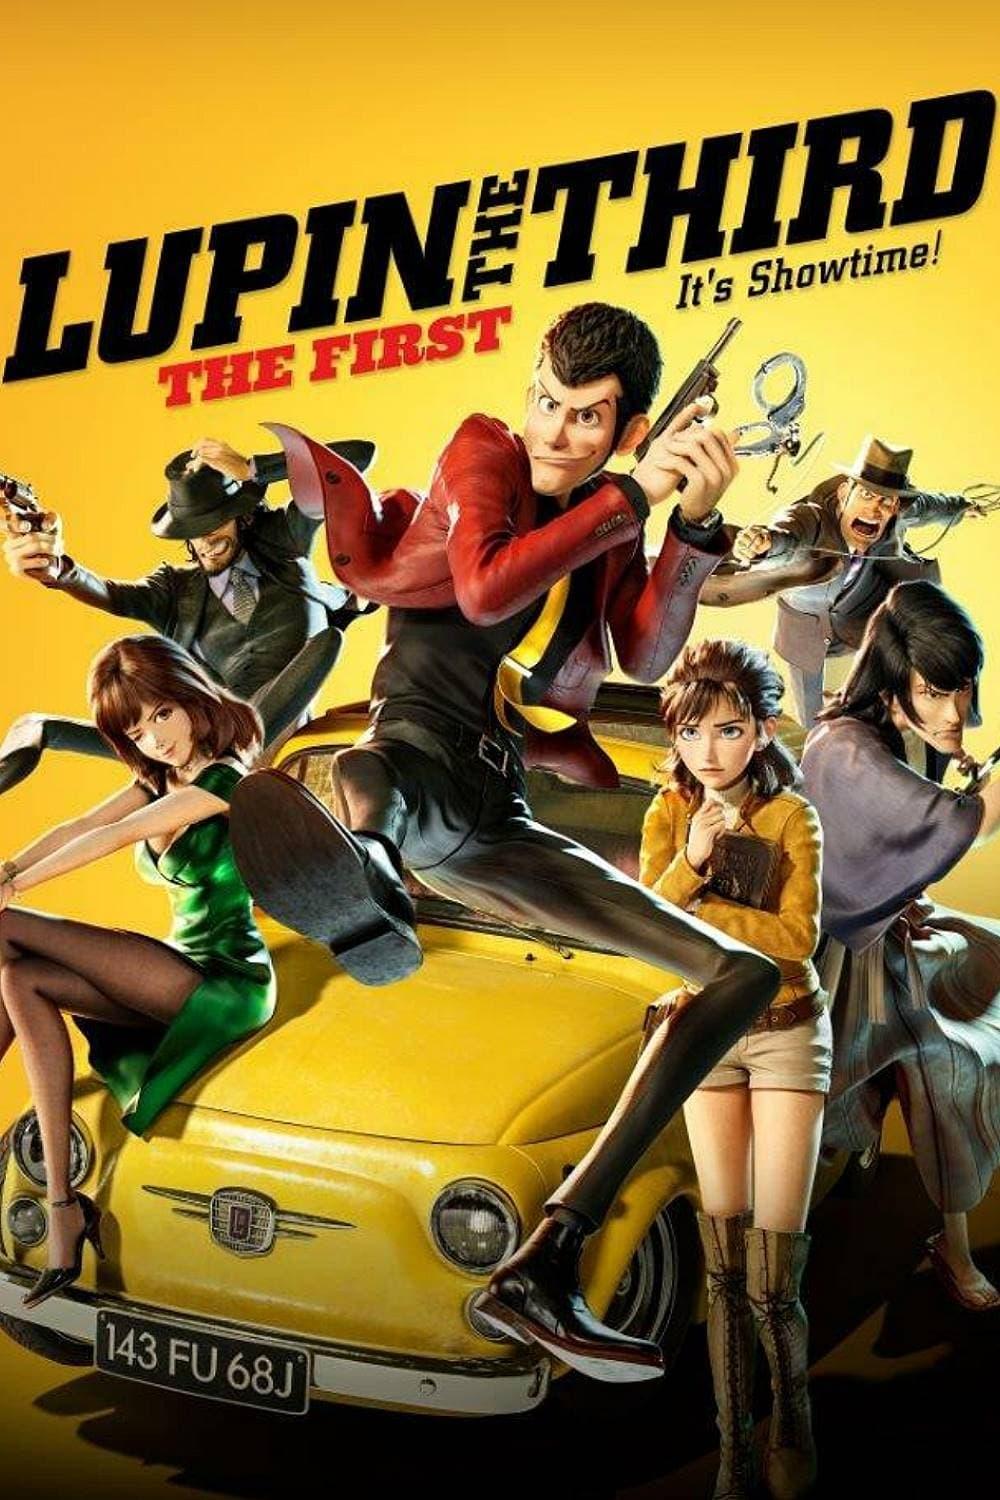 Lupin the 3rd: The First - The Movie poster